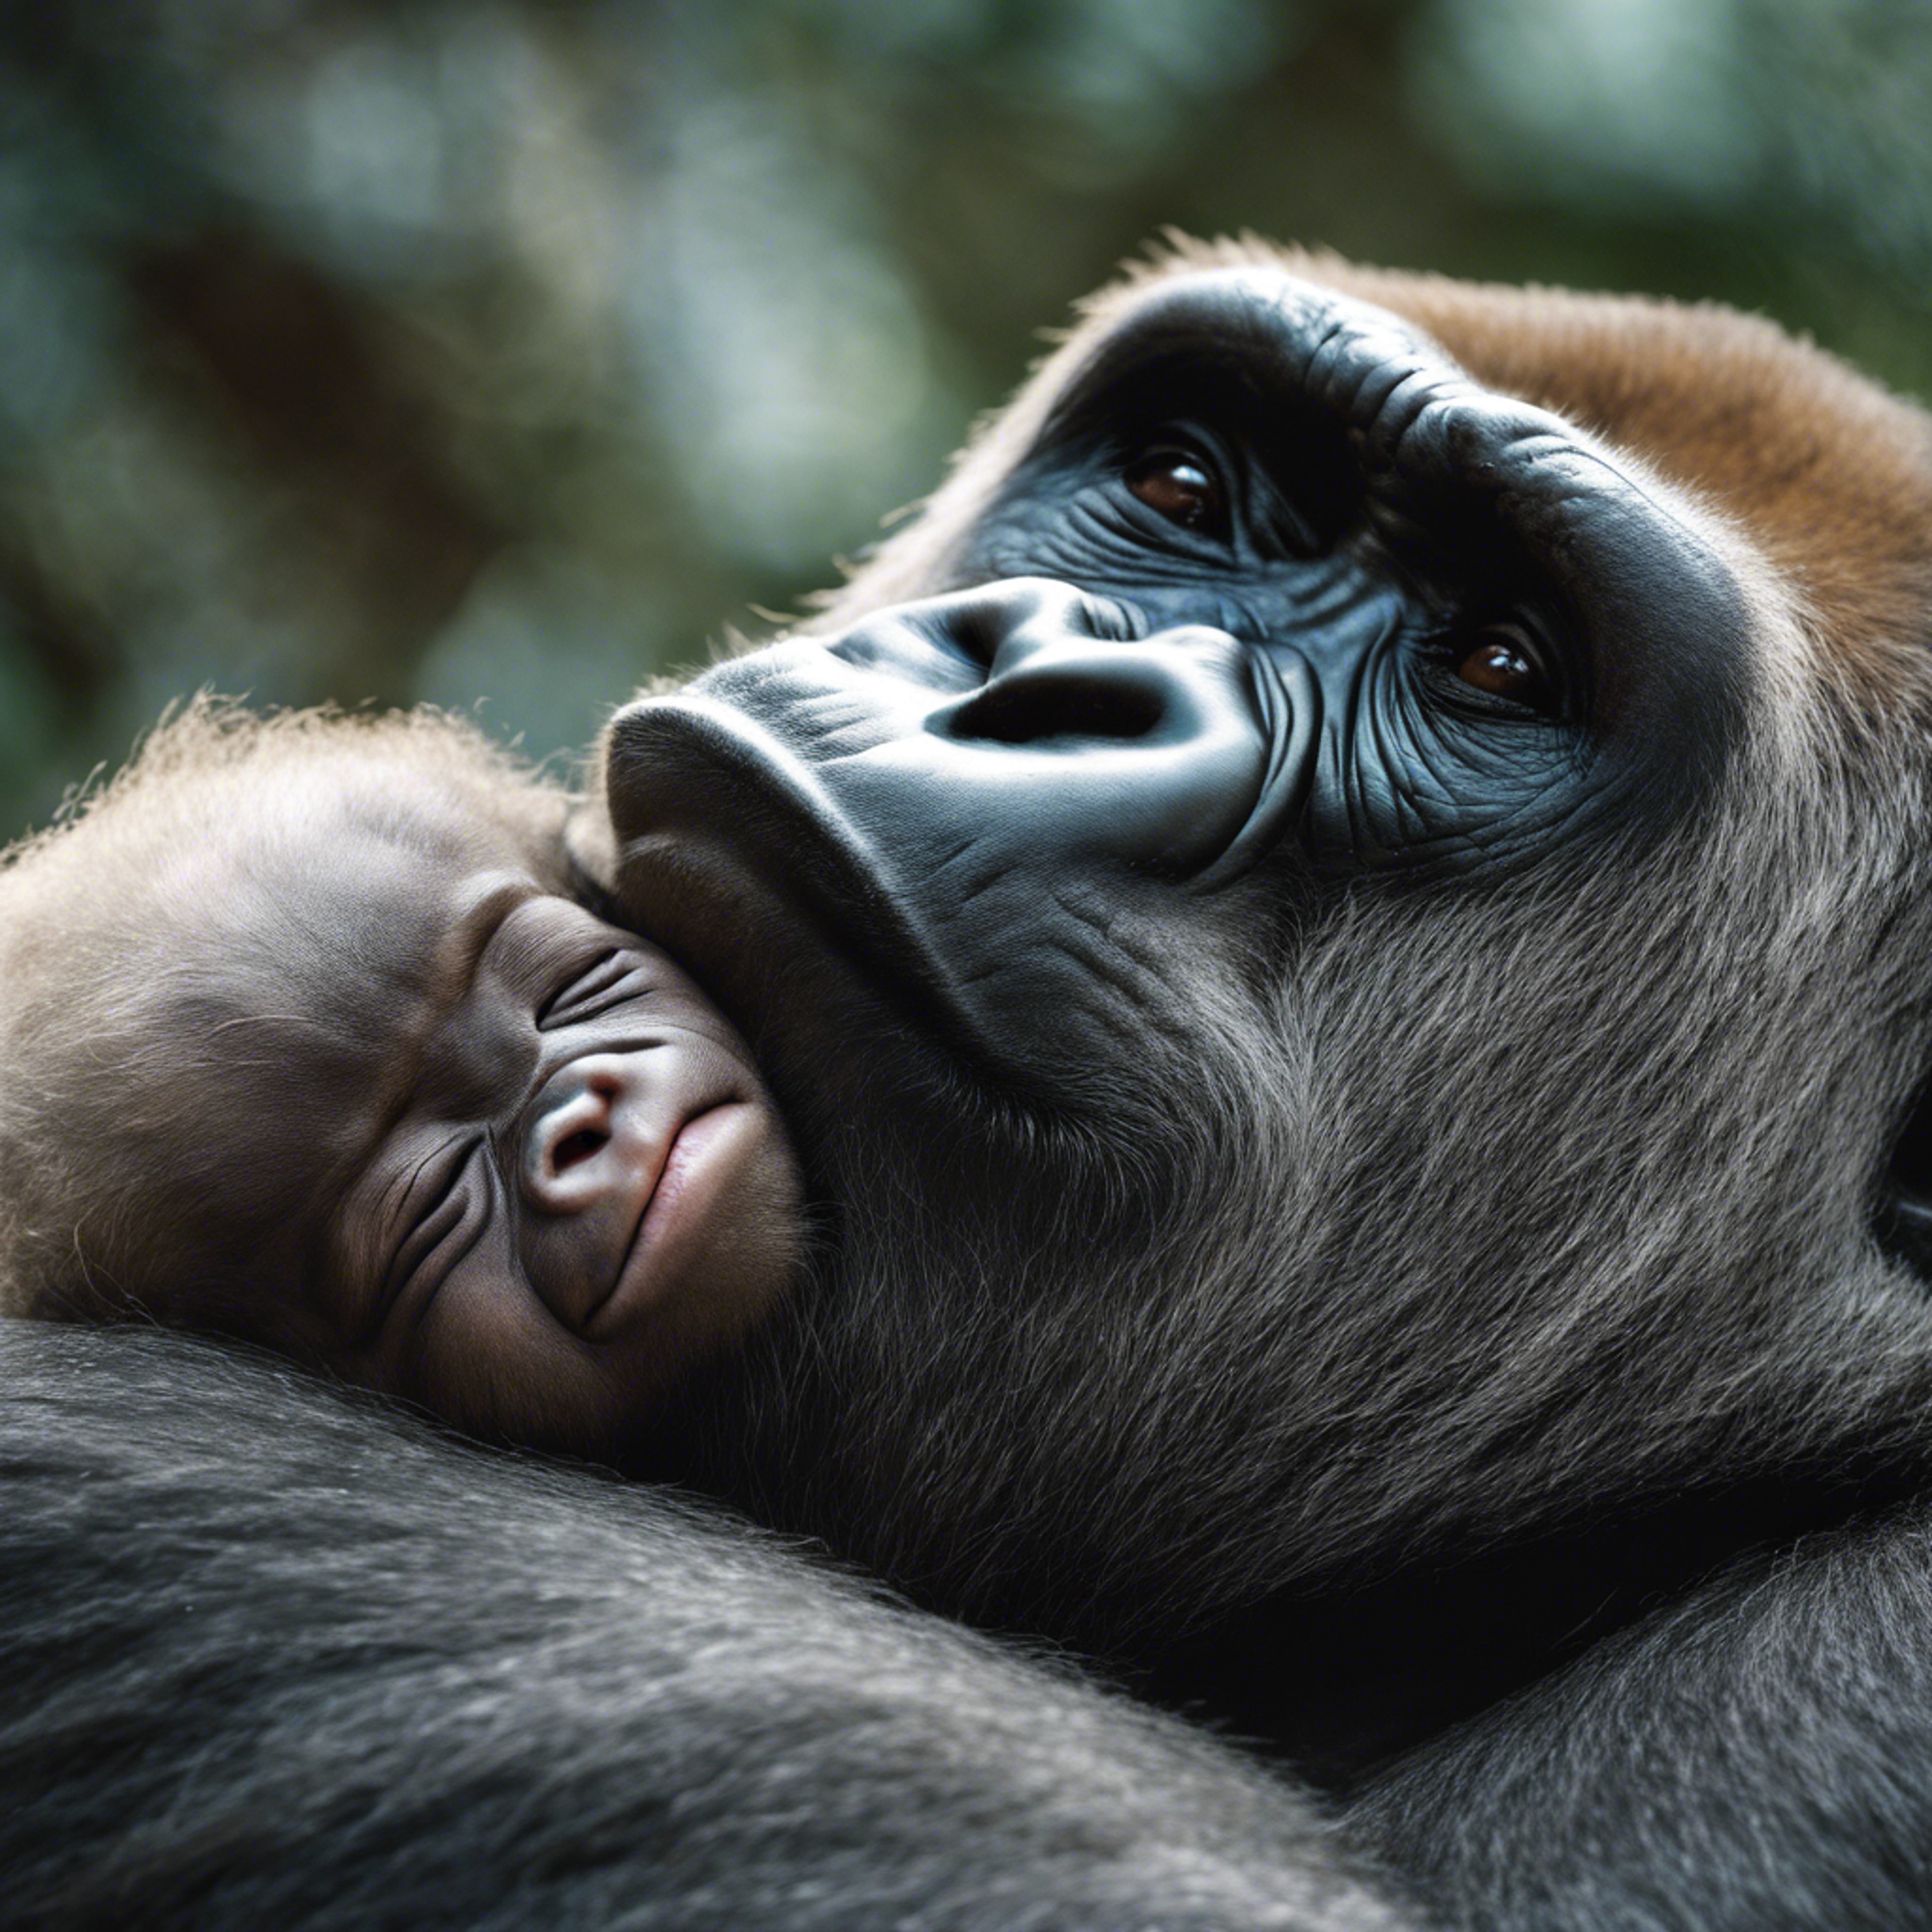 A close-up, emotional study of a gorilla mother's face as she cradles her sleeping newborn. Tapeta[516e0f2ed6254482ad03]